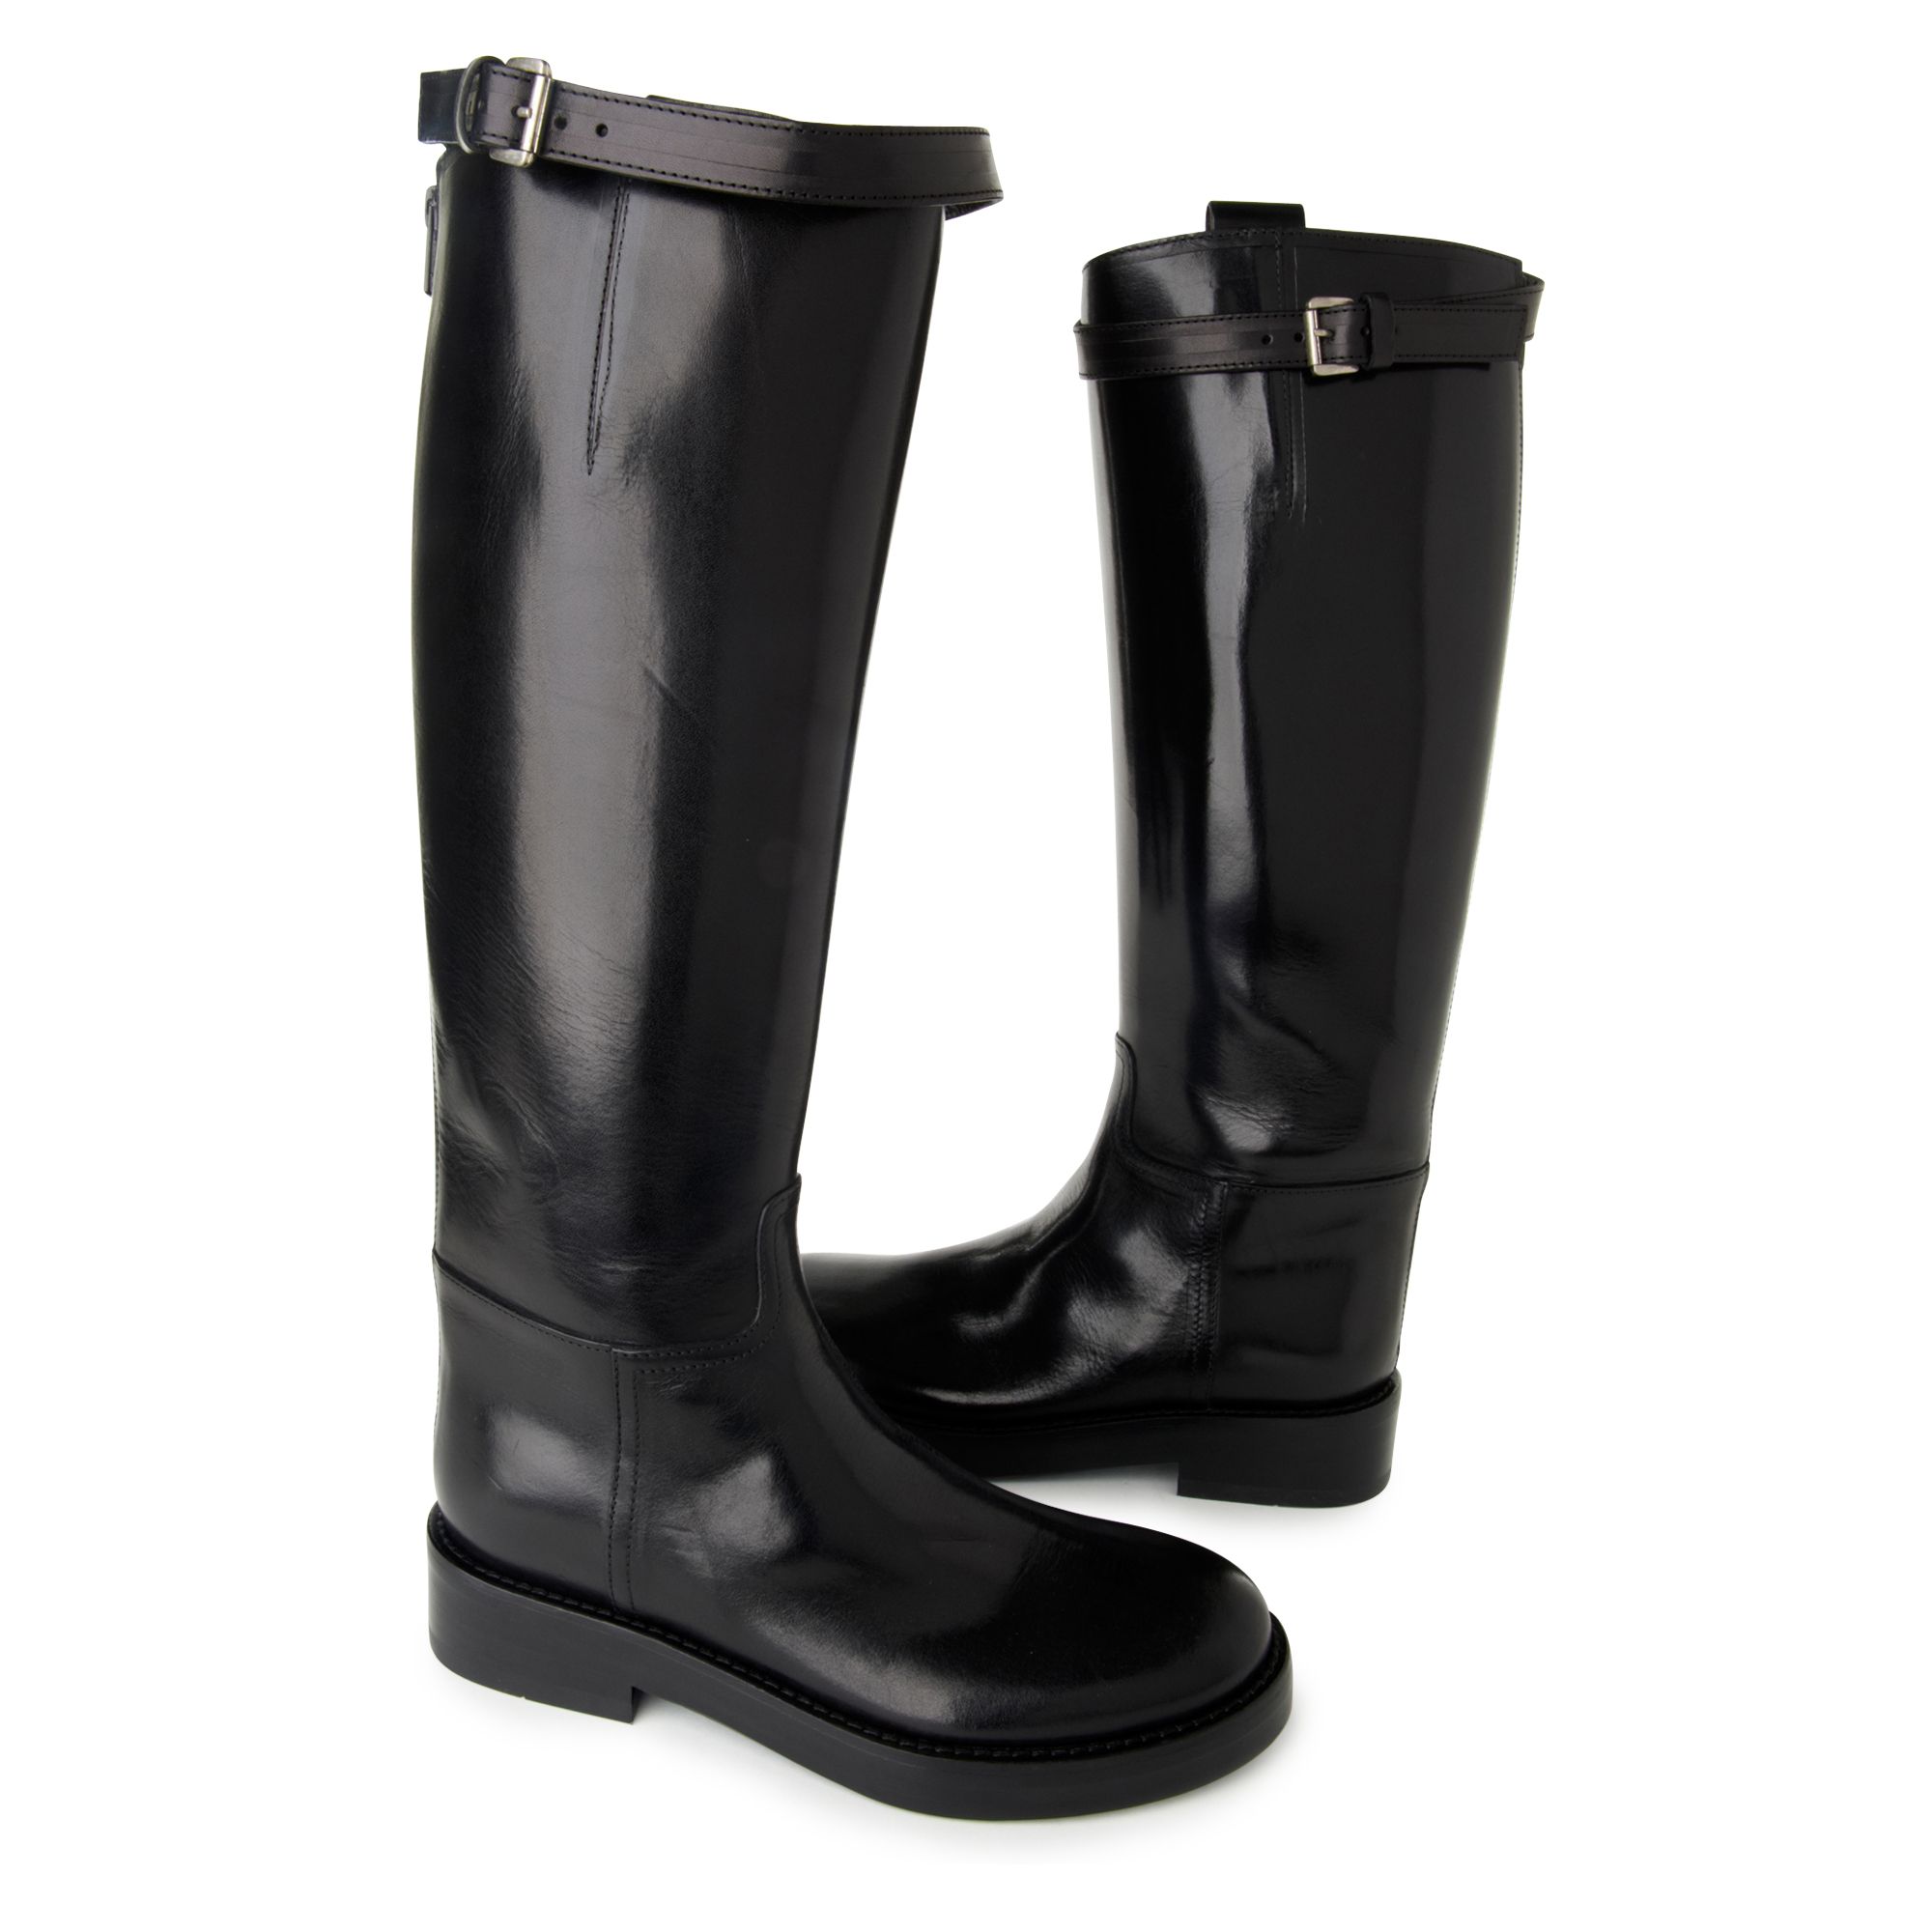 Ann demeulemeester Poetry Riding Boots in Black | Lyst